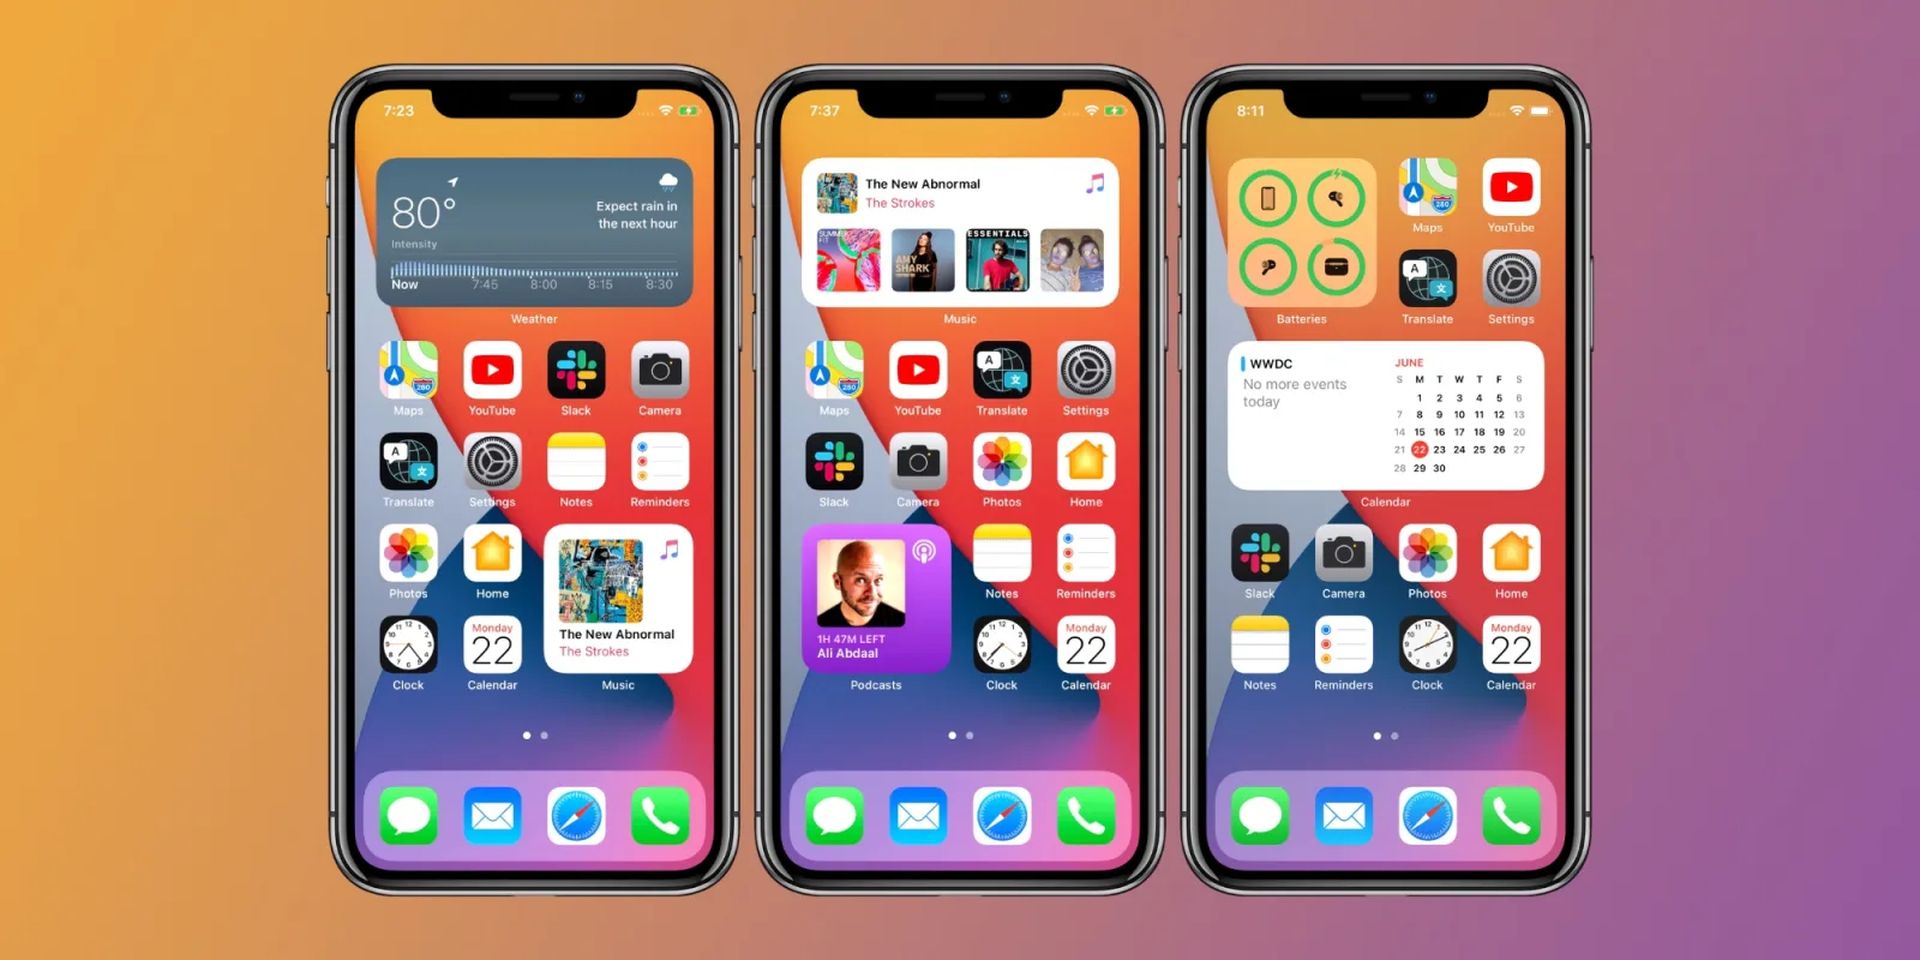 In this article, we are going to be going over how to add apps back to home screen on iPhone, so you can customize the location of your apps however you like.